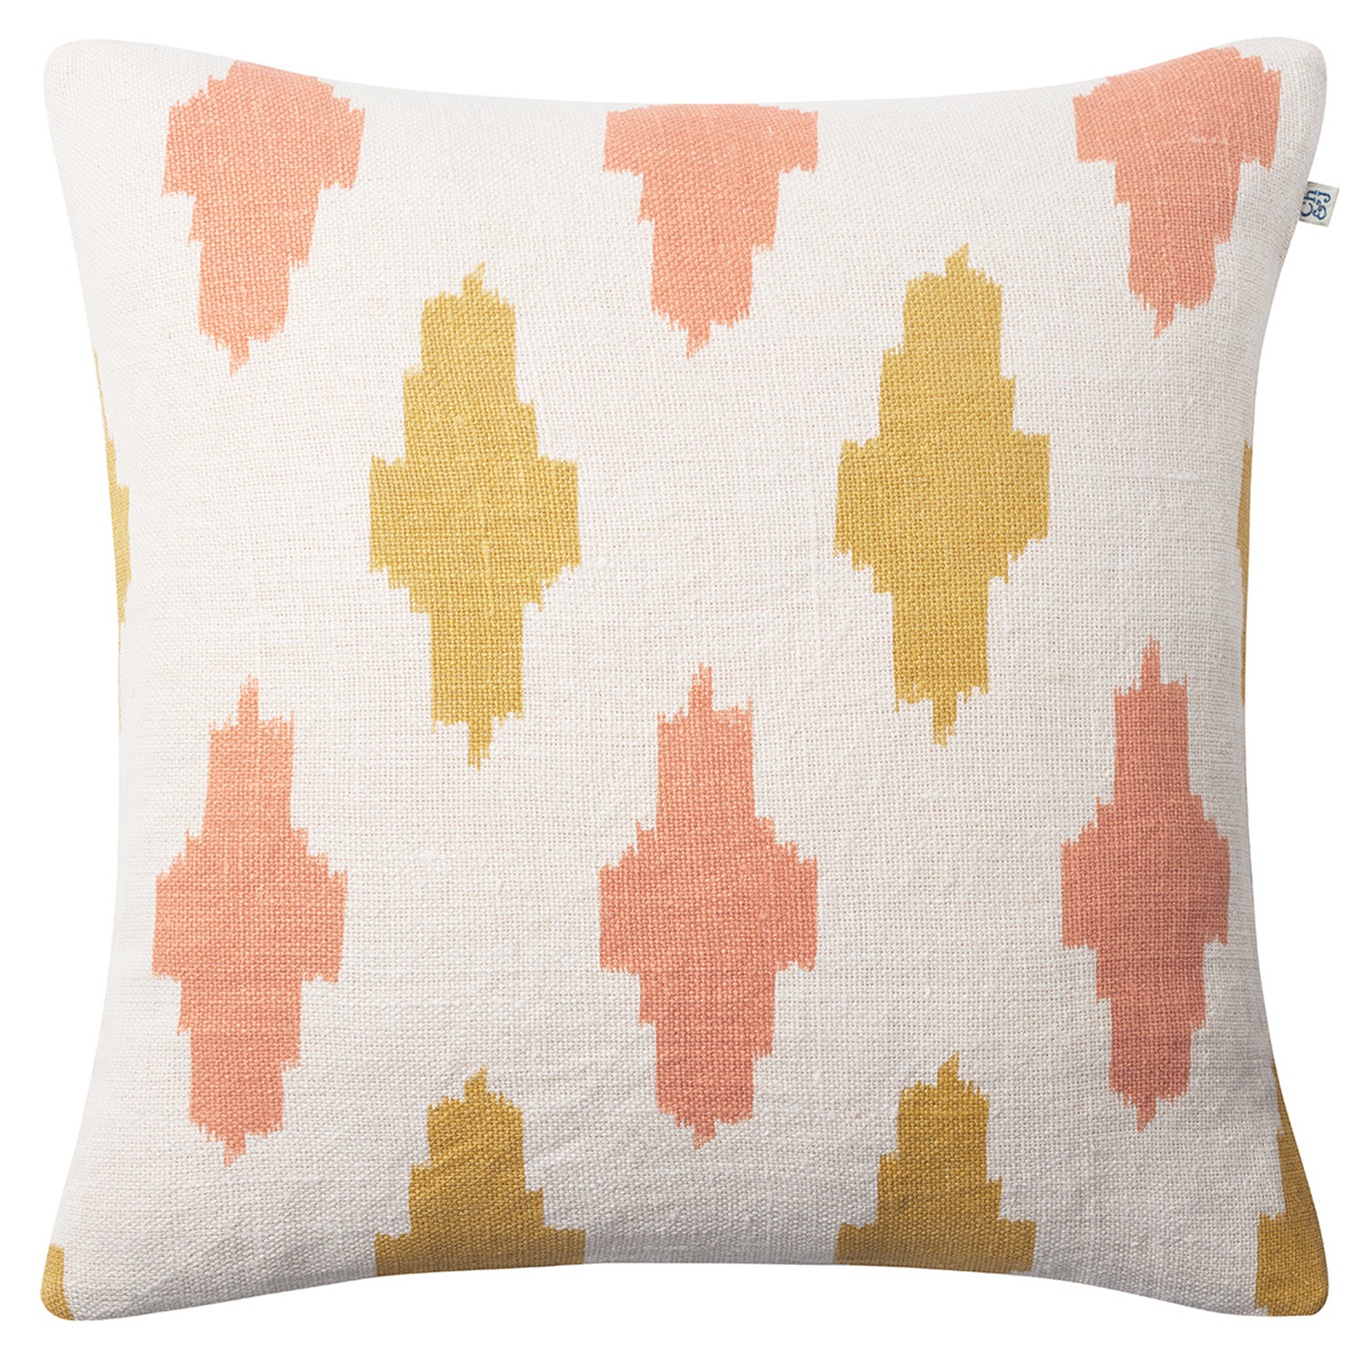 Ikat Agra Cushion Cover 50x50 cm, Rose/Spicy Yellow